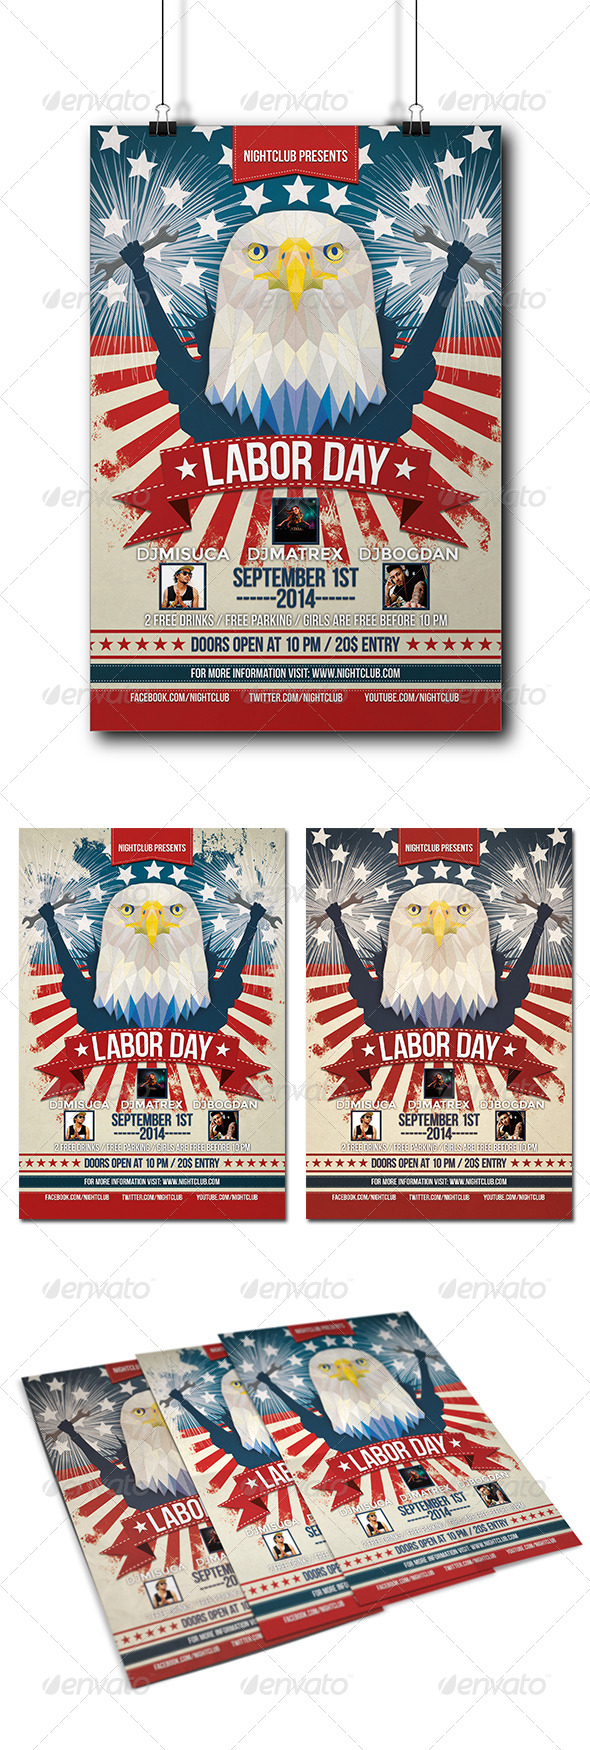 Labor Day Party Flyers